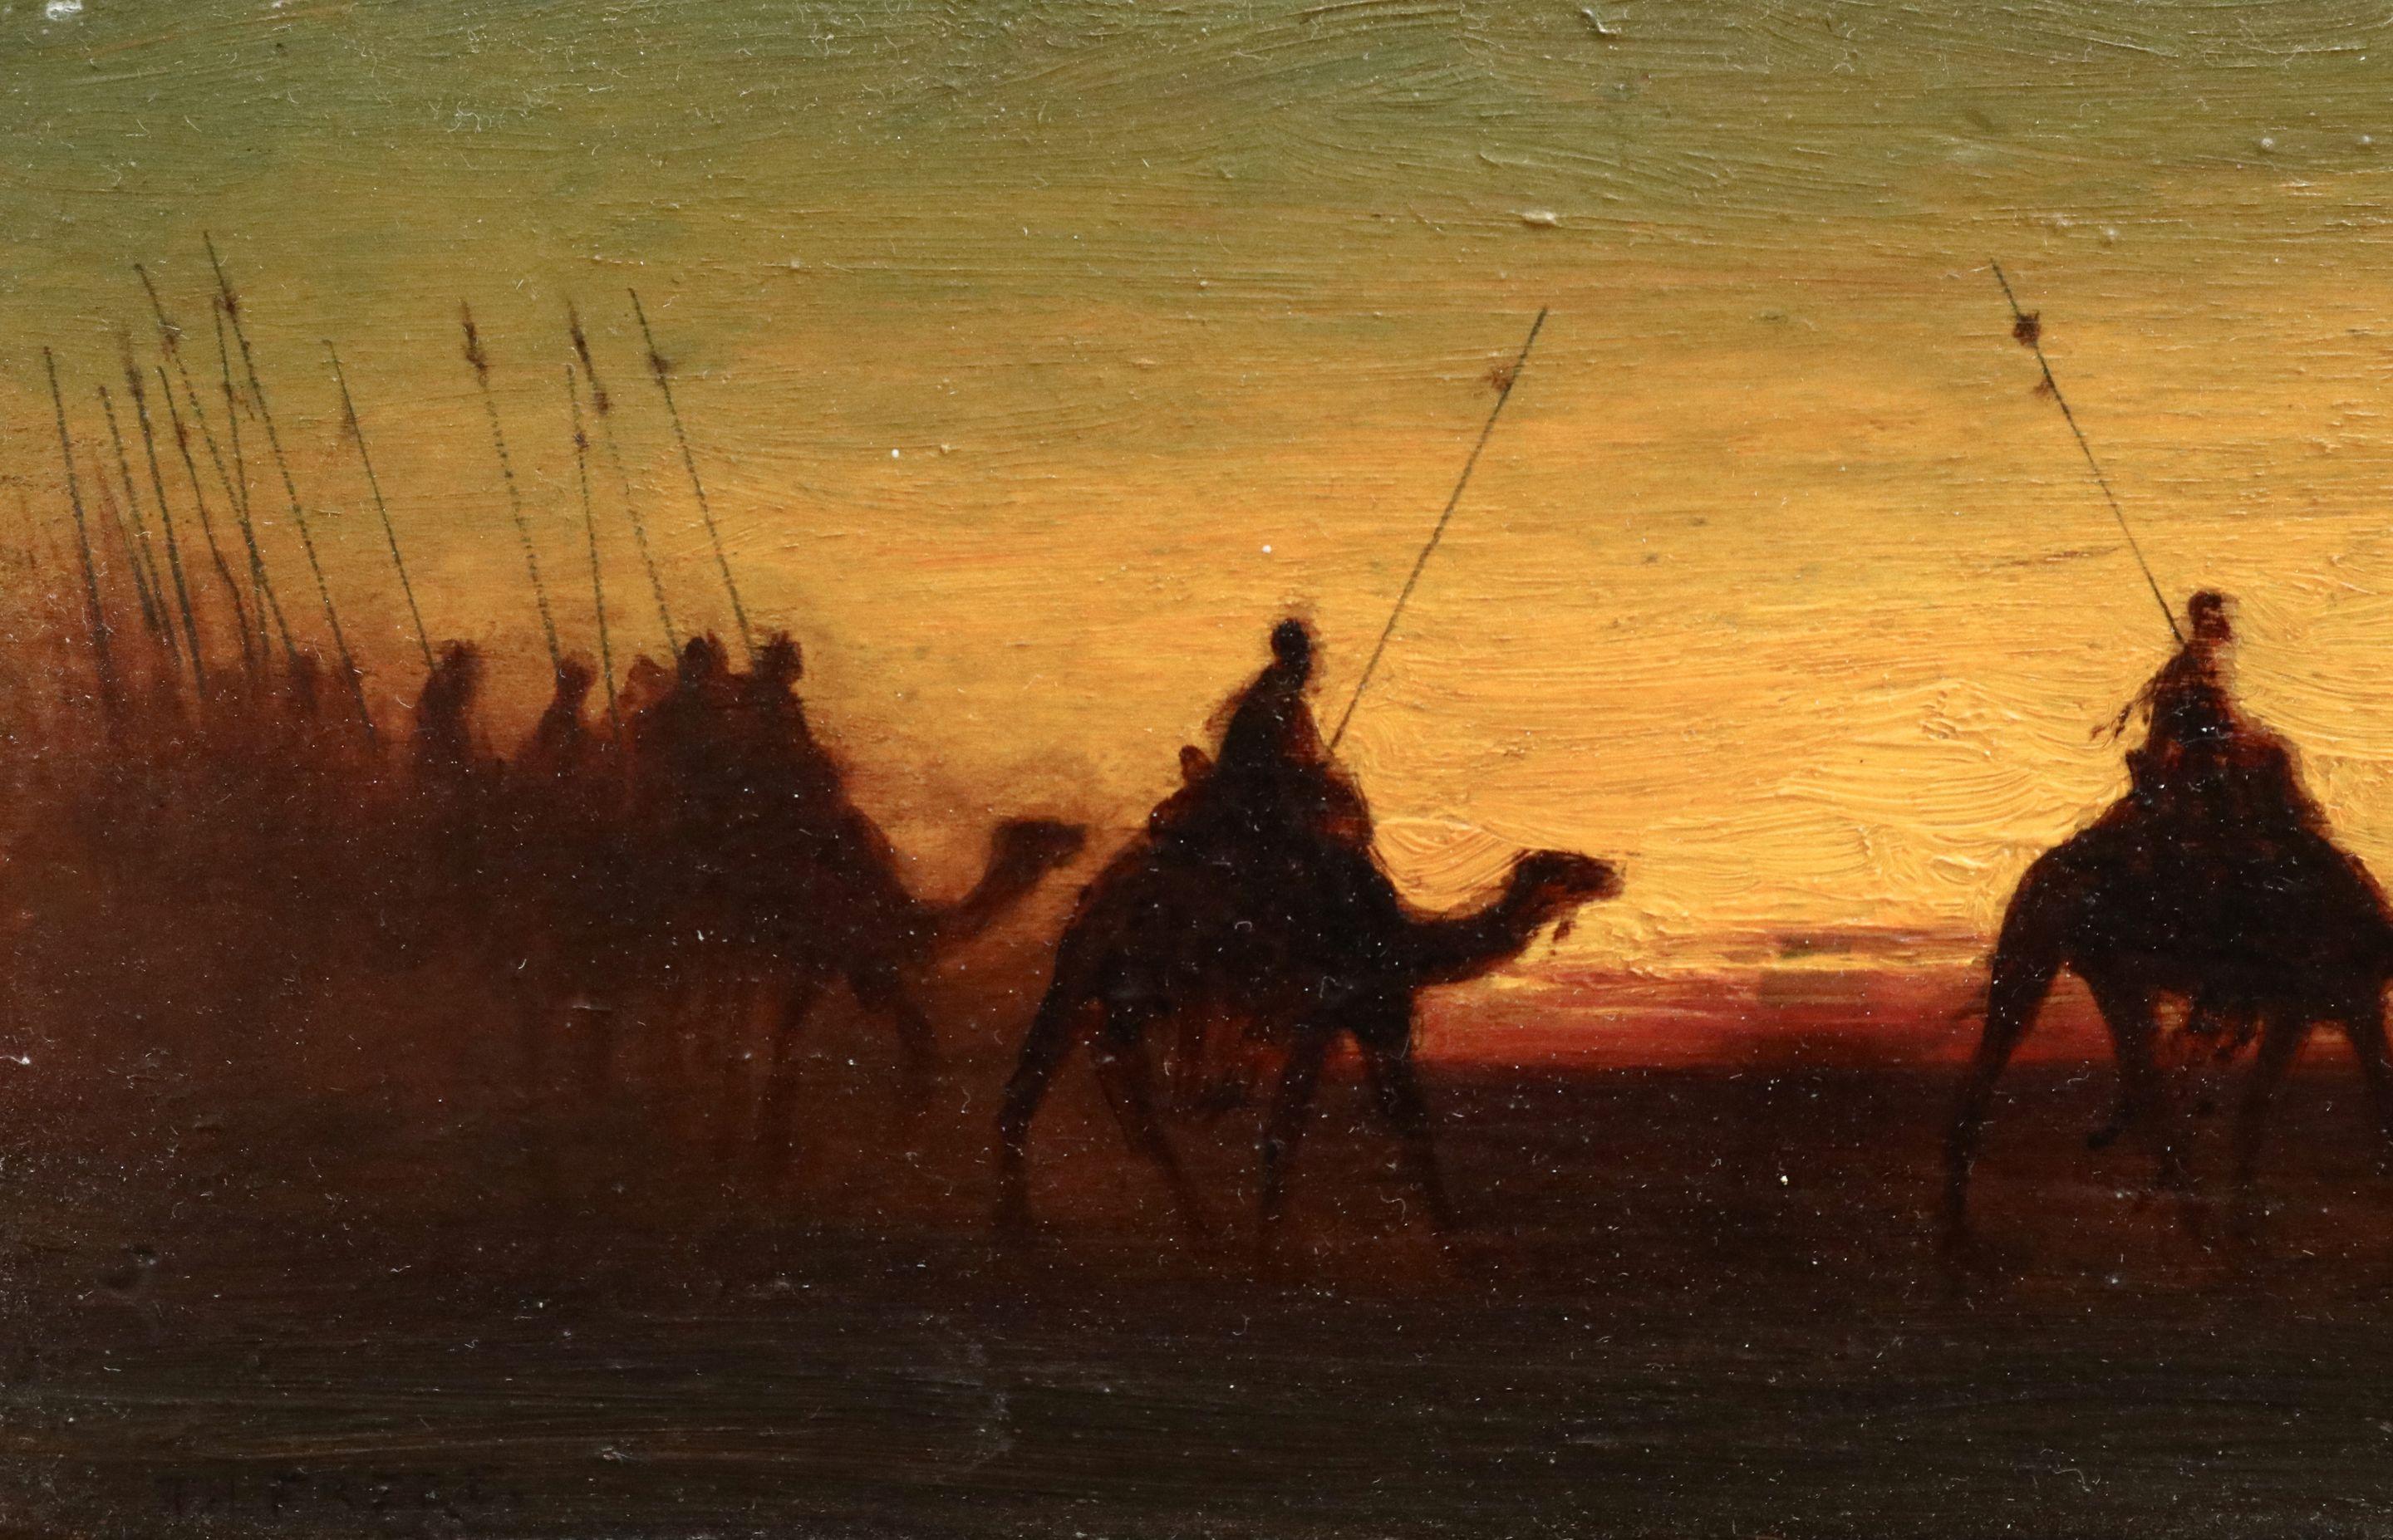 The Caravan - Evening - 19th Century Oil, Figures on Camels in Landscape - Frere - Painting by Theodore Frère